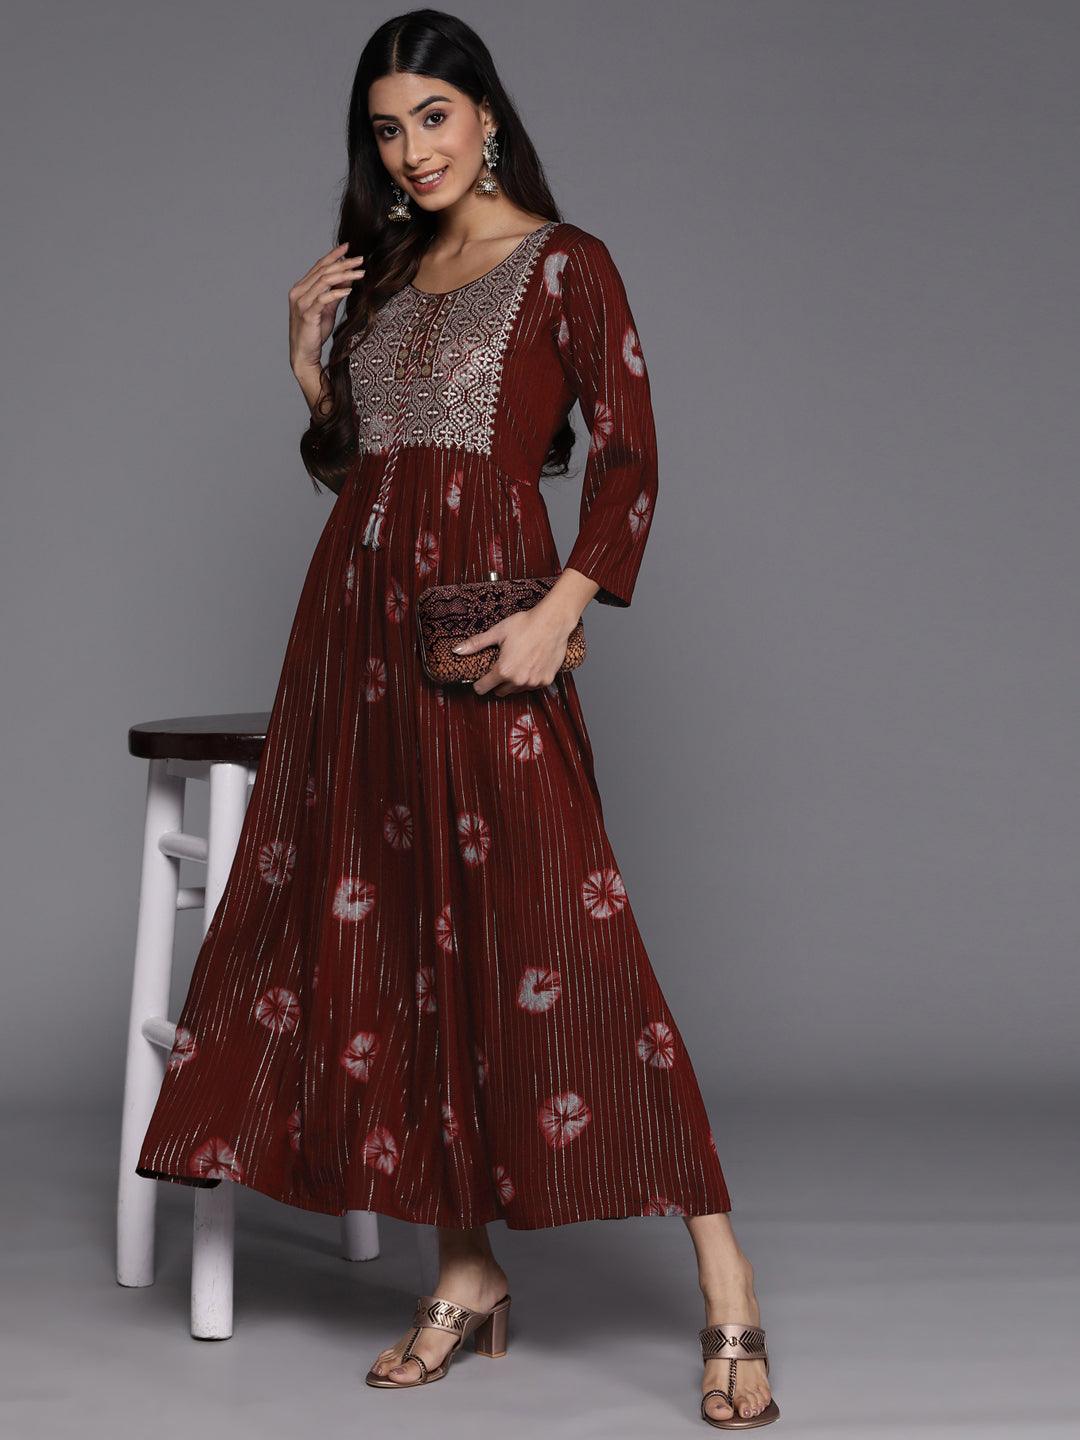 Maroon Printed Fit and Flare Rayon Dress - Libas